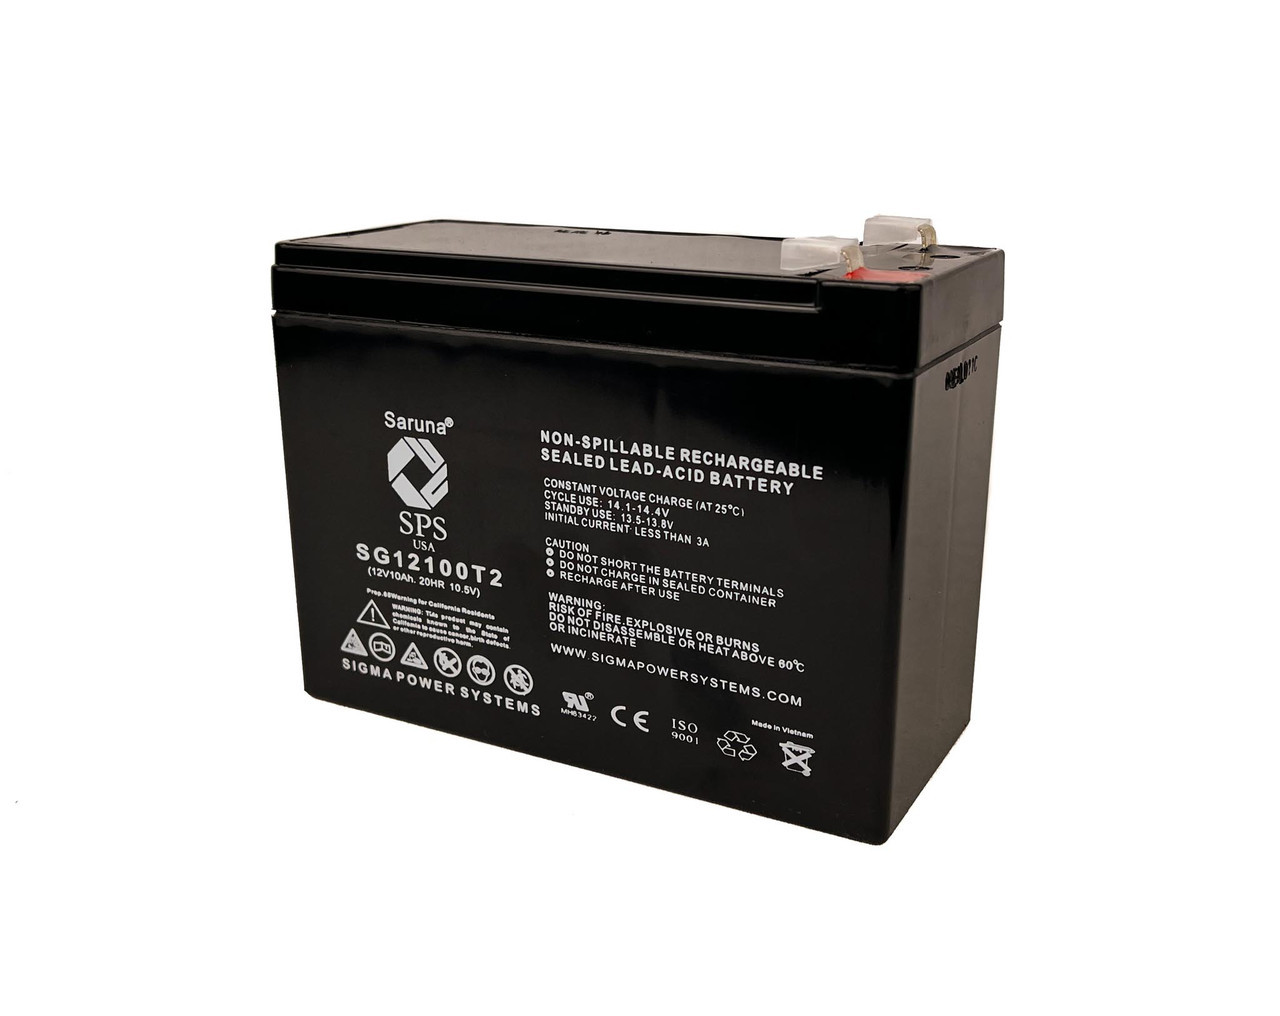 Raion Power 12V 10Ah Non-Spillable Replacement Rechargebale Battery for Motoma MS12V10